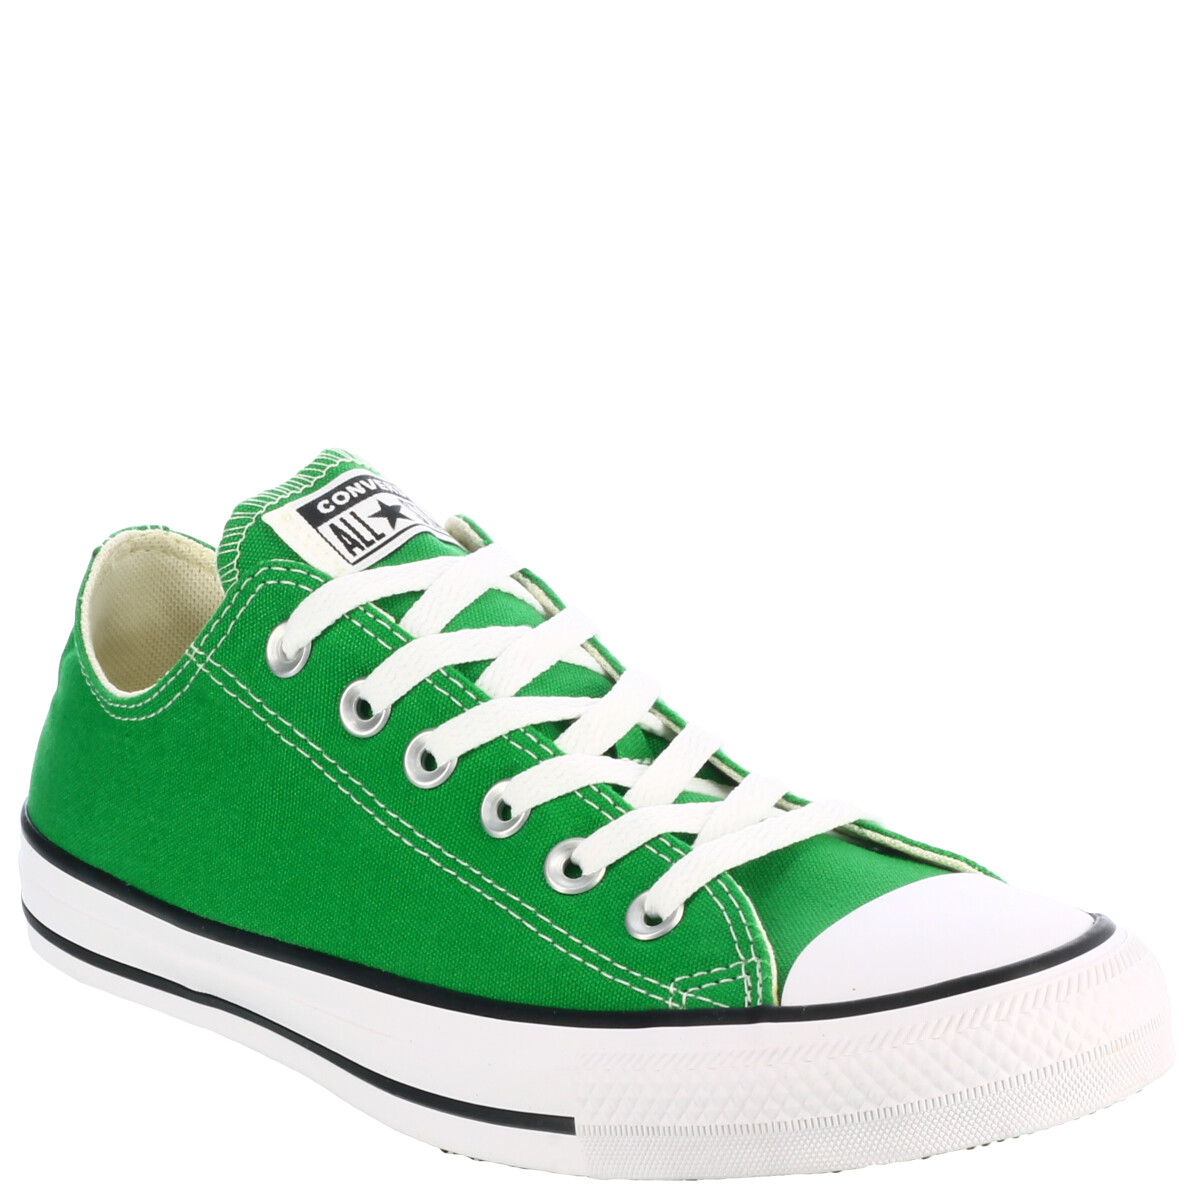 Classic - Basket Low Converse - All Star - Verde Claro 